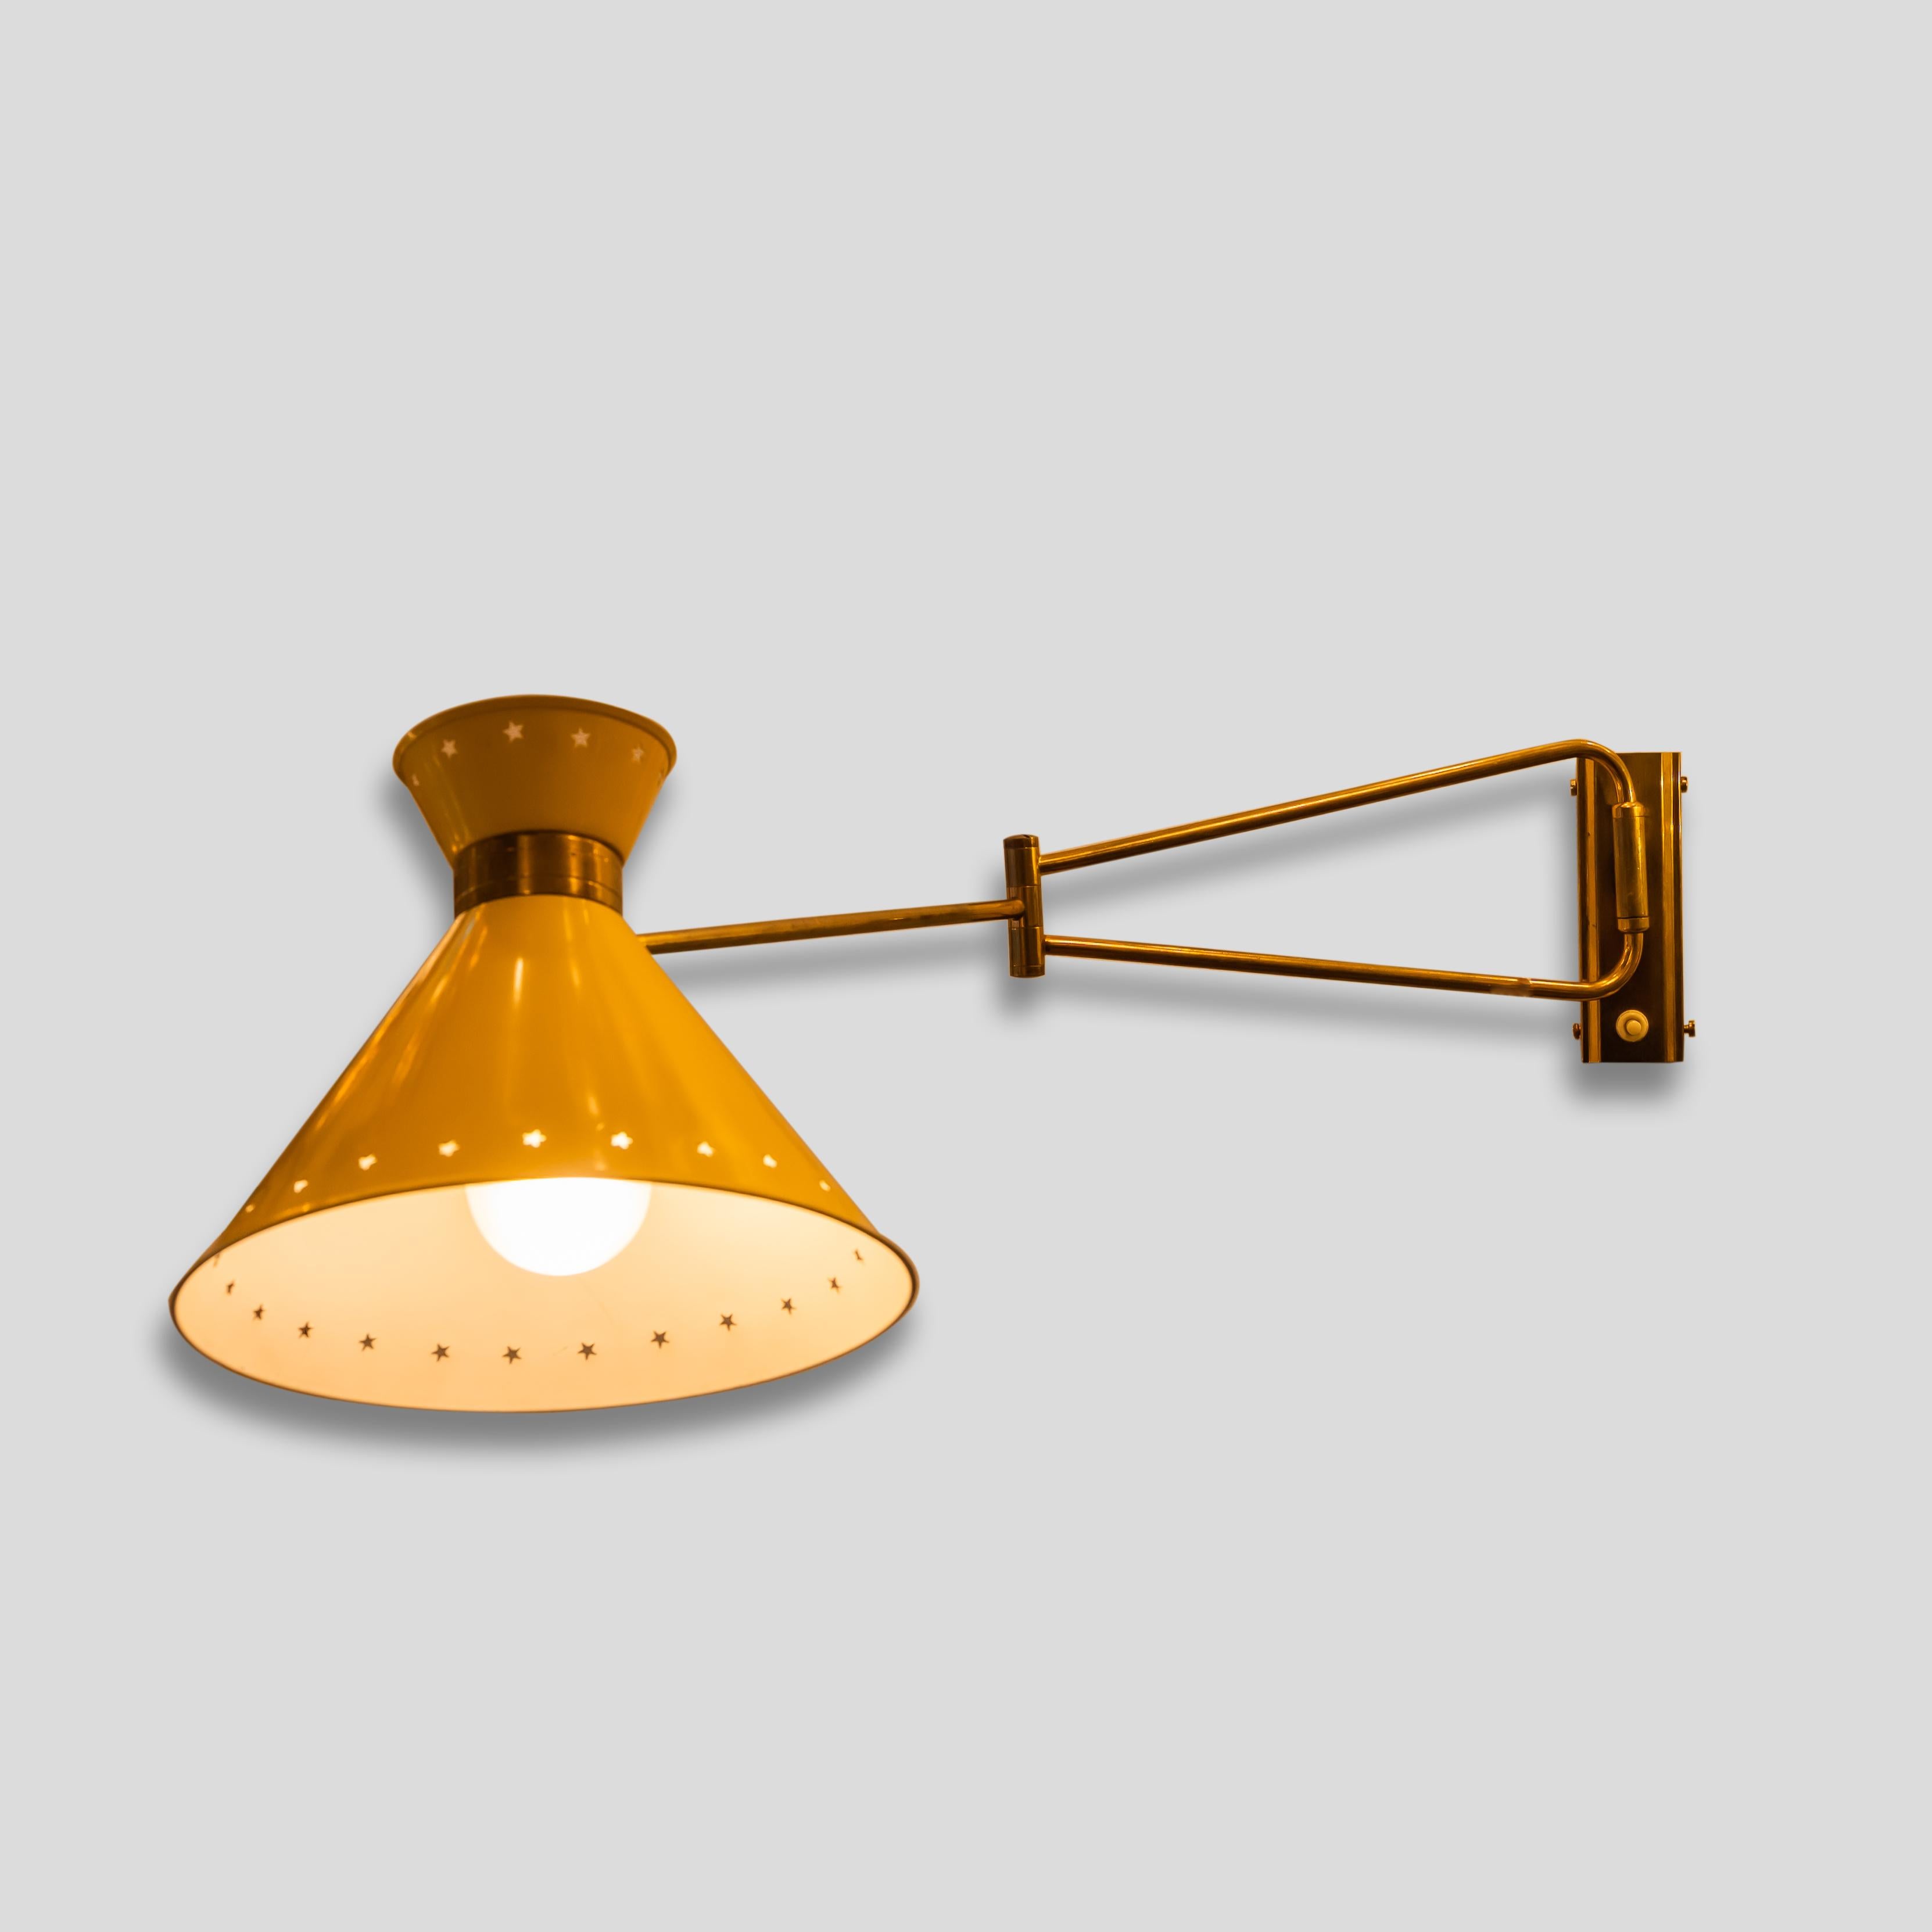 A sconce yellow enamelled color shade on brass structure, articulating shade and moving arm. 1950s design by Rene Mathieu for Lunel